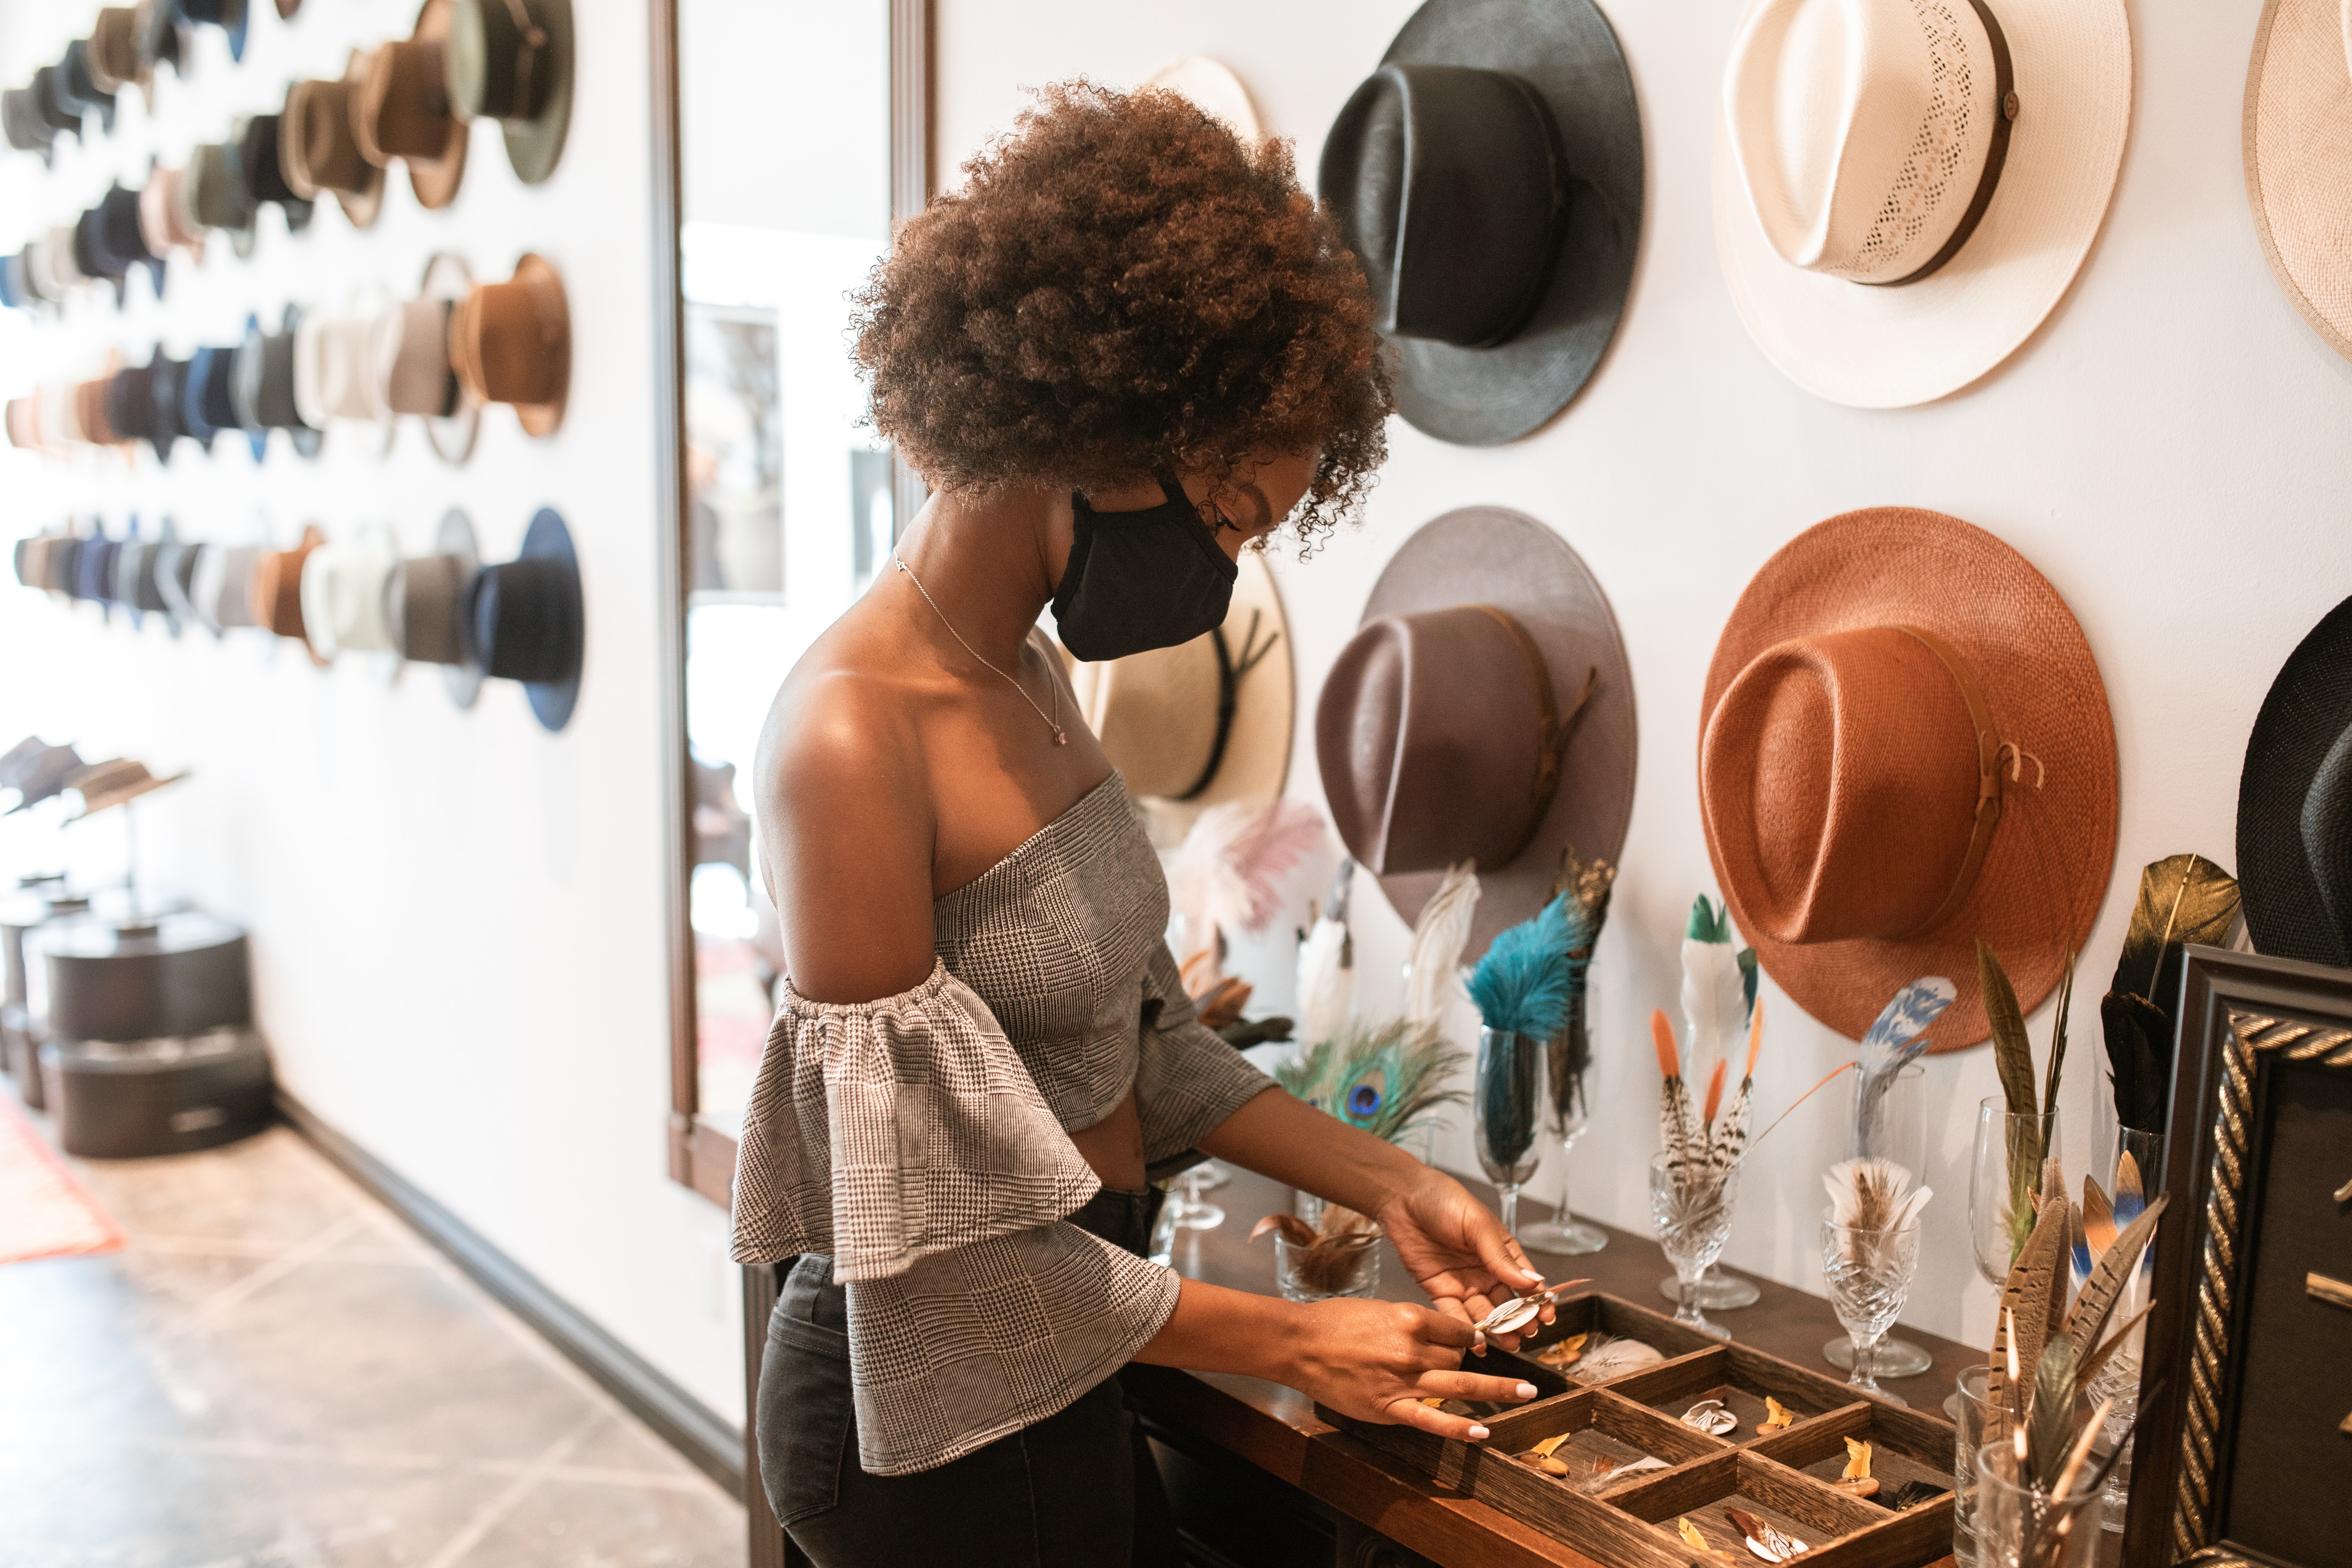 Shop for Hats at these Stores Around Redmond